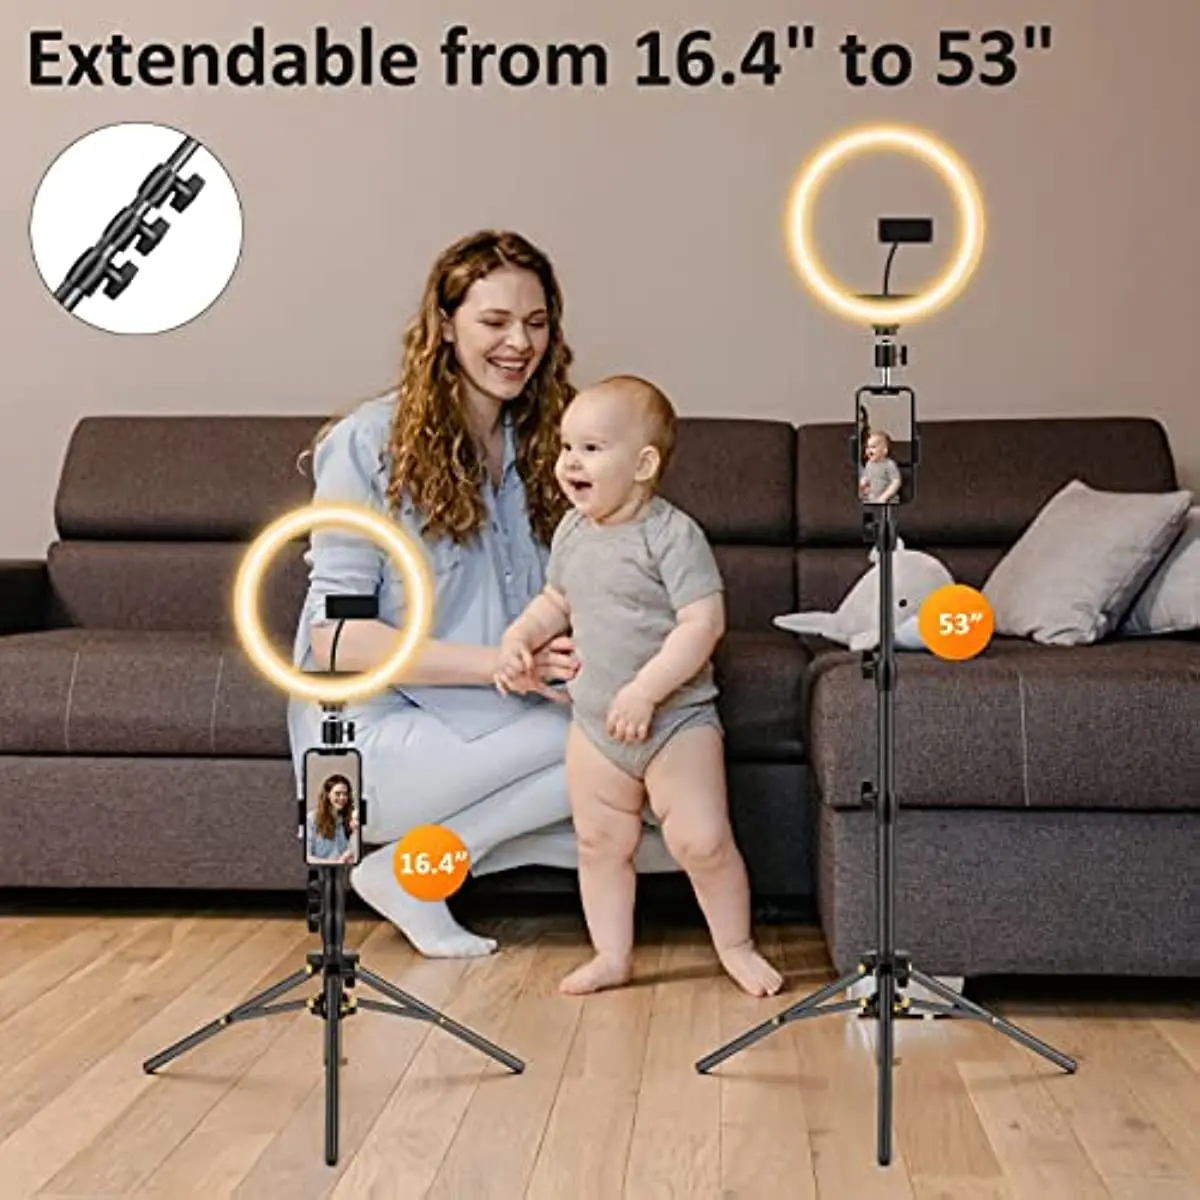 

26cm Selfie Ring Light with Tripod Stand & 2 Phone Holders,Dimmable Led Camera Ringlight for Photography/Makeup/Live Stream